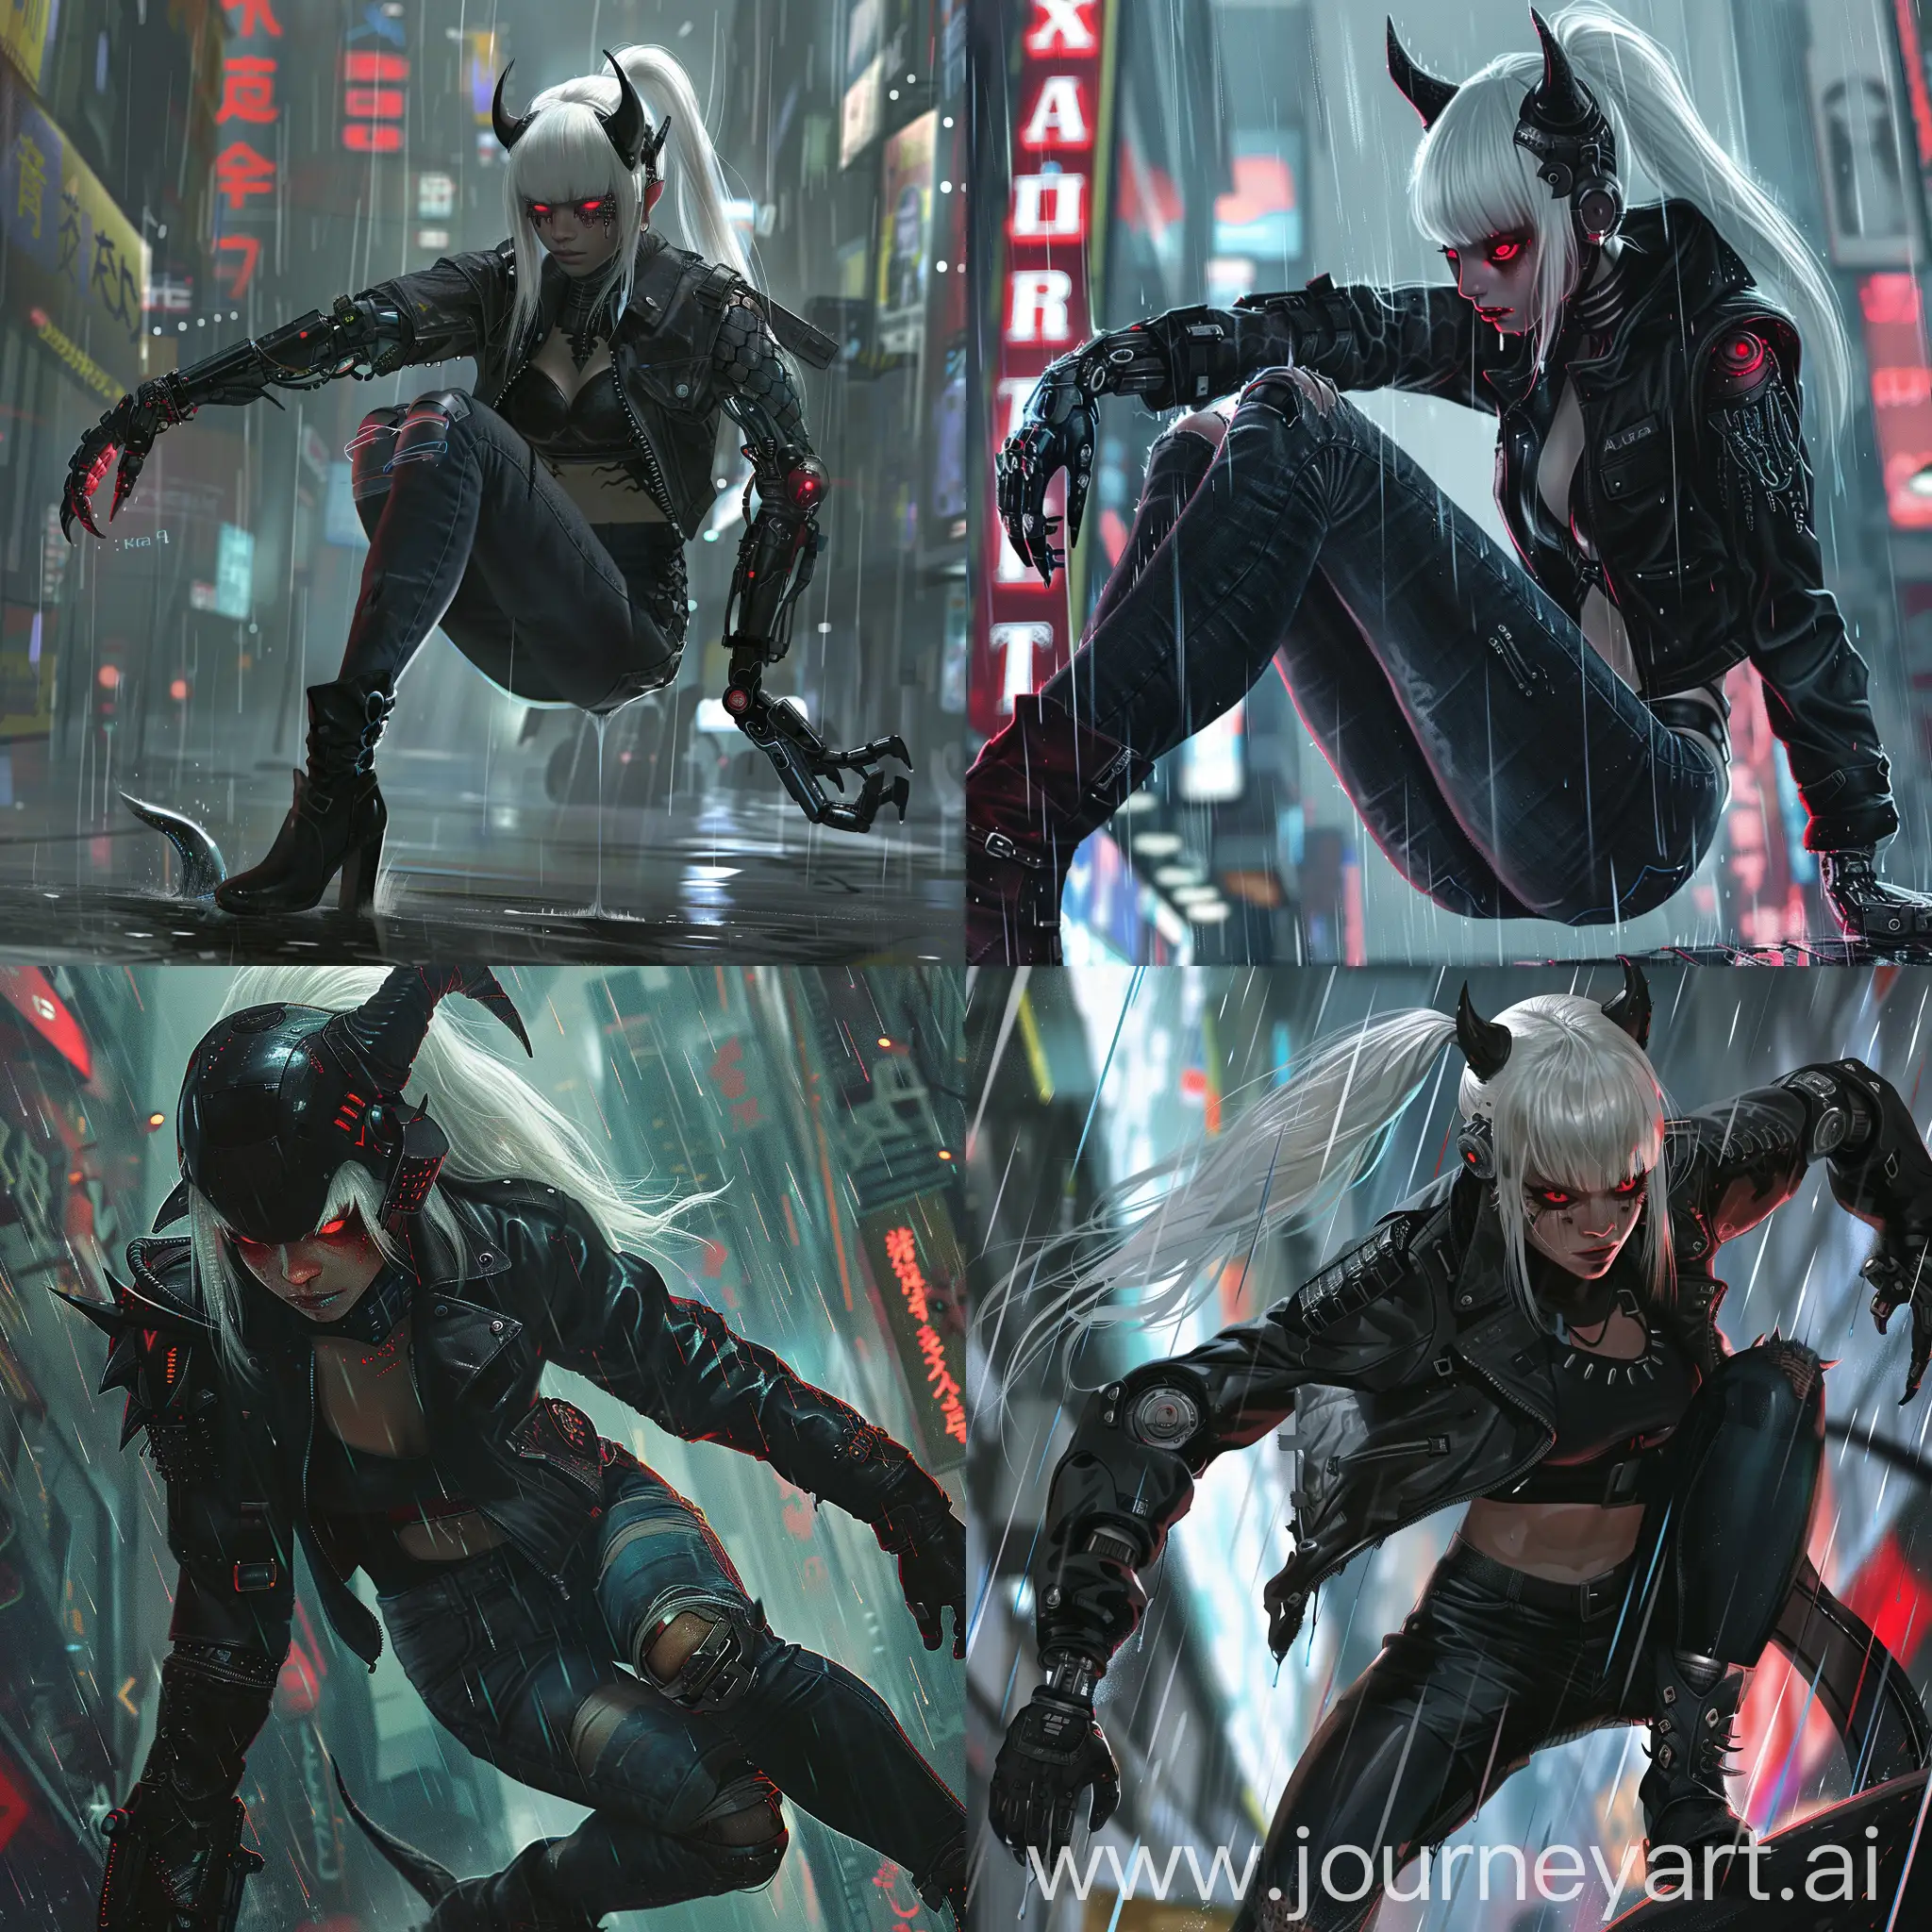 full portait, Au ra race, Xaela clan, female, face type 4, face scales, horns inward, white ponytail with bangs, black skin color, red eyes with black sclera, wearing black jacket black jeans black boots, robotic right arm, demon left arm, sliding, raining in the cyber city, chromatic abberation